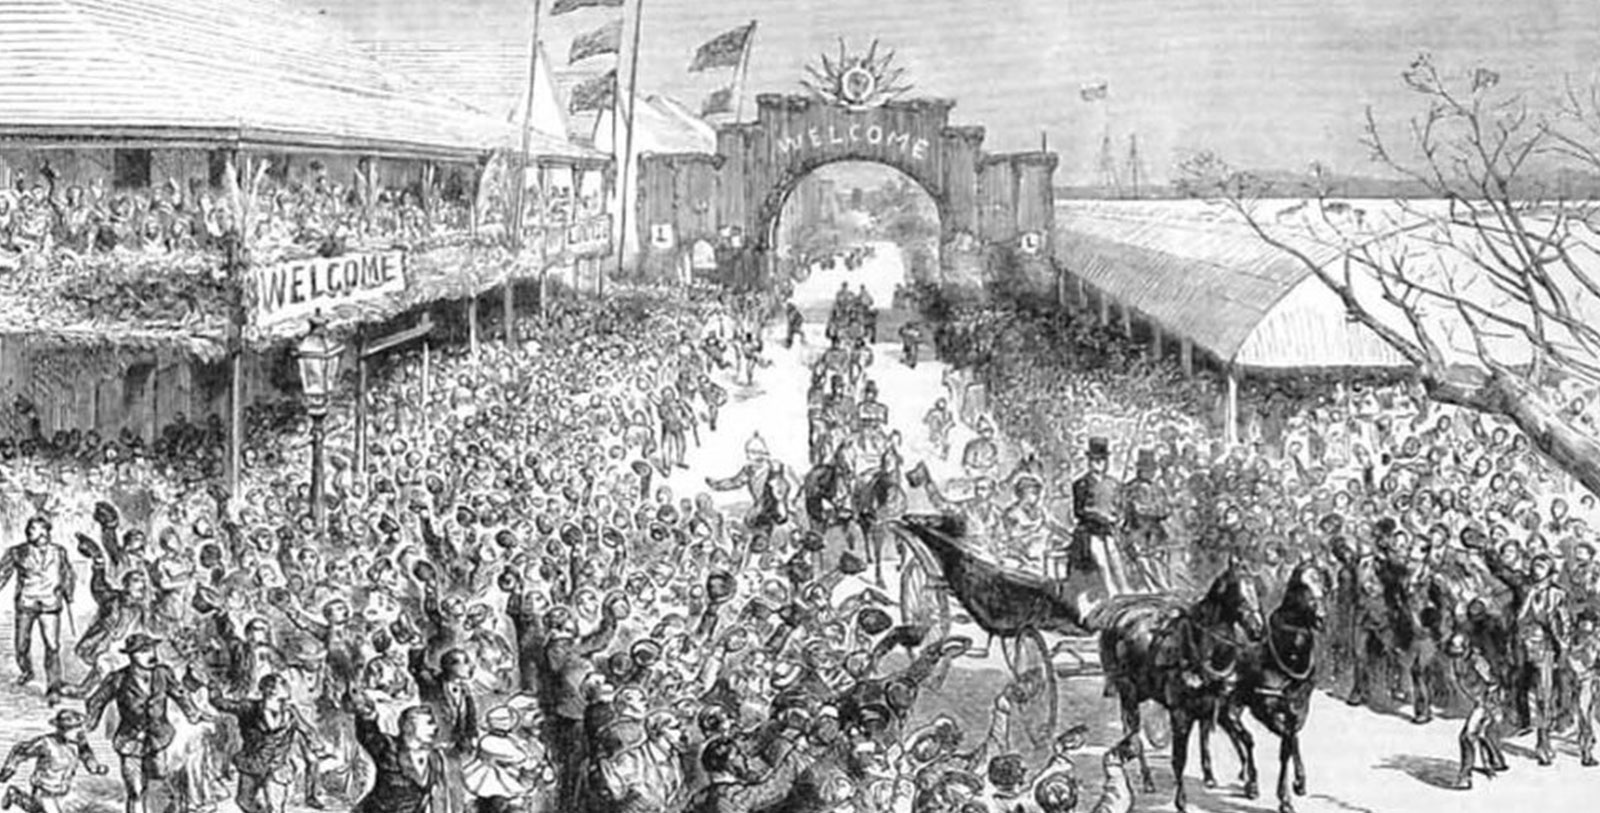 Historical Image of Princess Louise's arrival, Hamilton Princess & Beach Club, A Fairmont Managed Hotel, 1885, Member of Historic Hotels Worldwide, in Hamilton, Bermuda, History Mystery